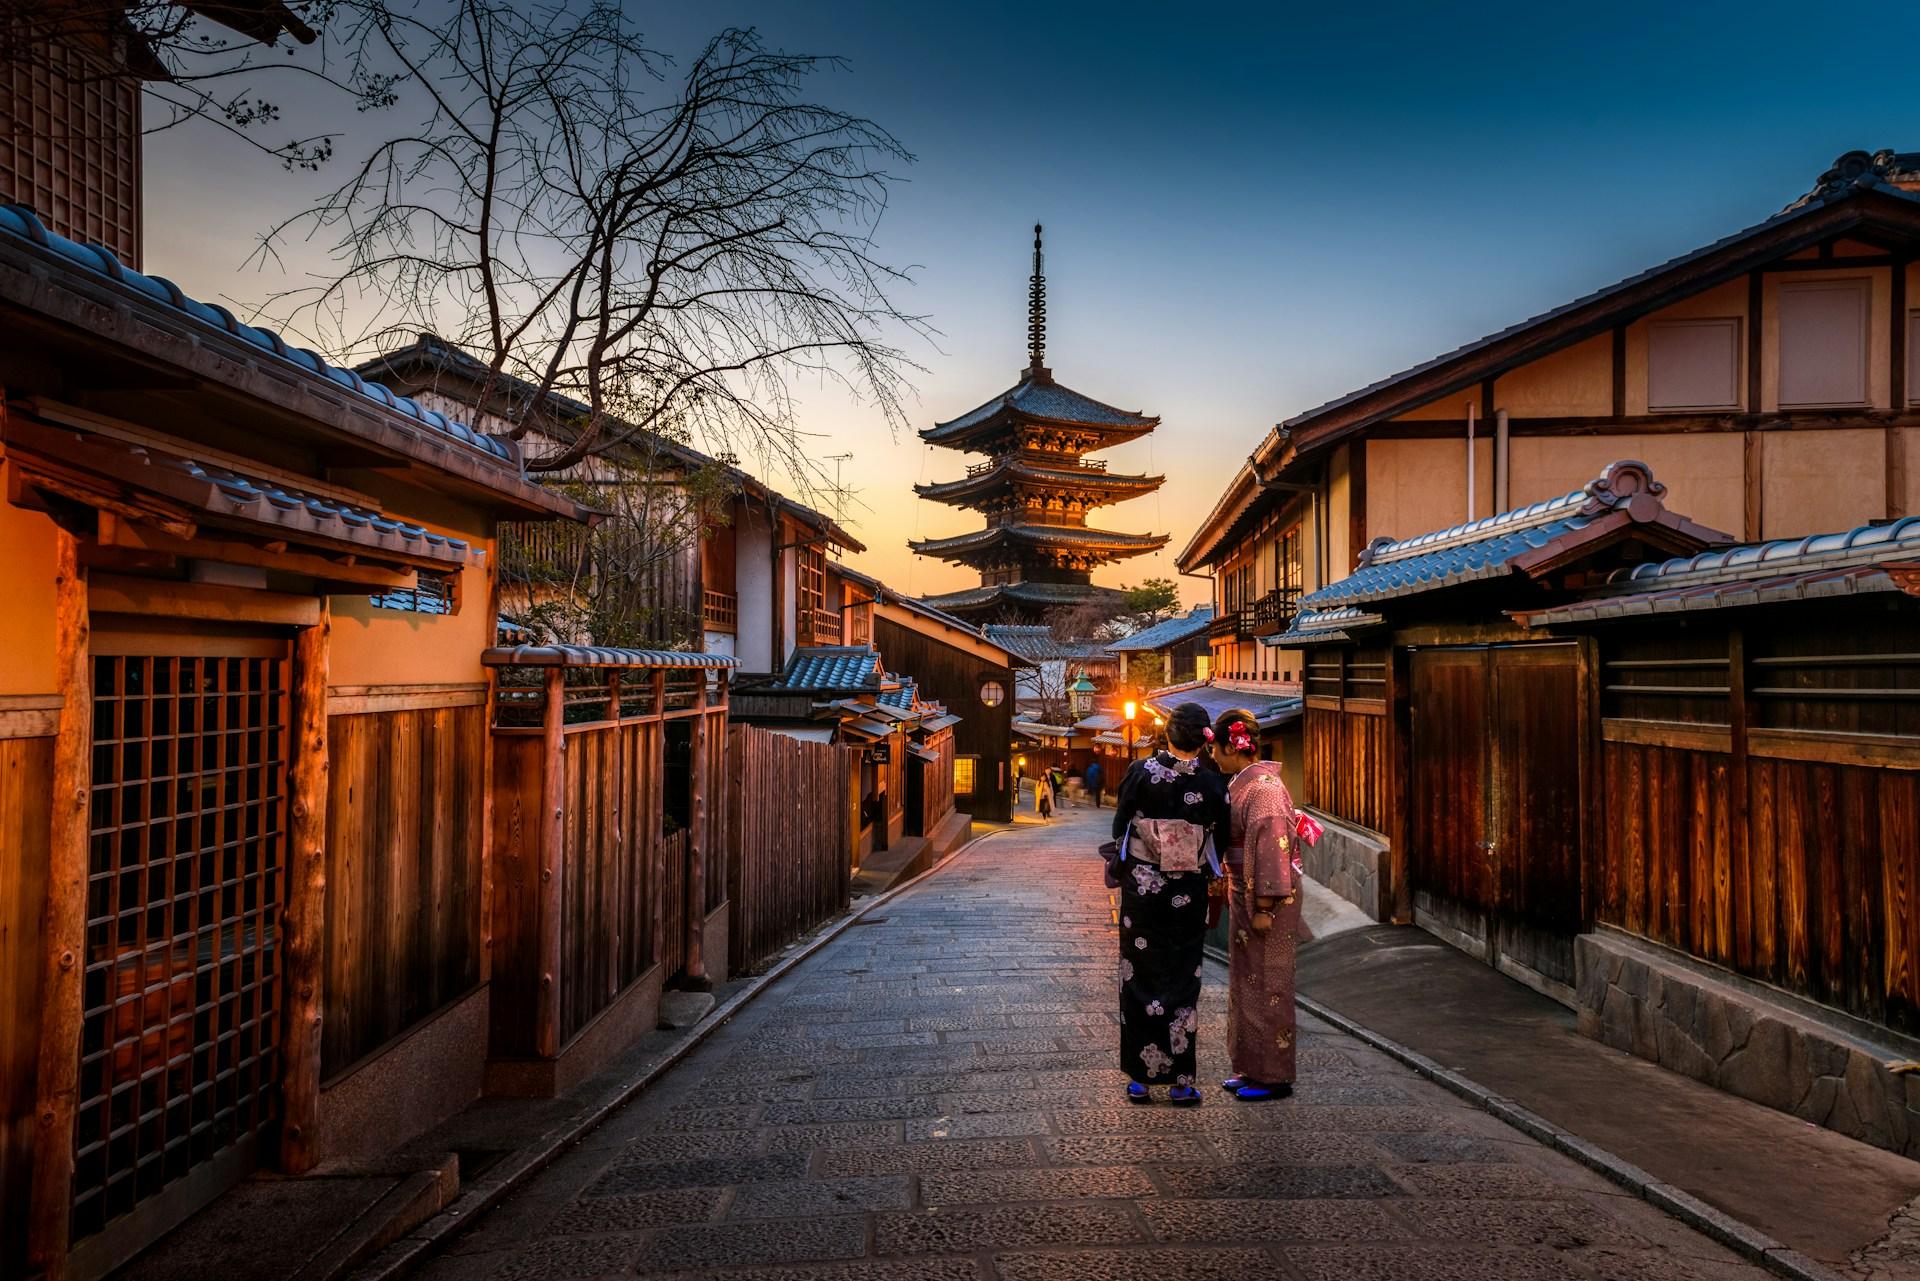 5 Hidden Gems You Can't Miss in Kyoto